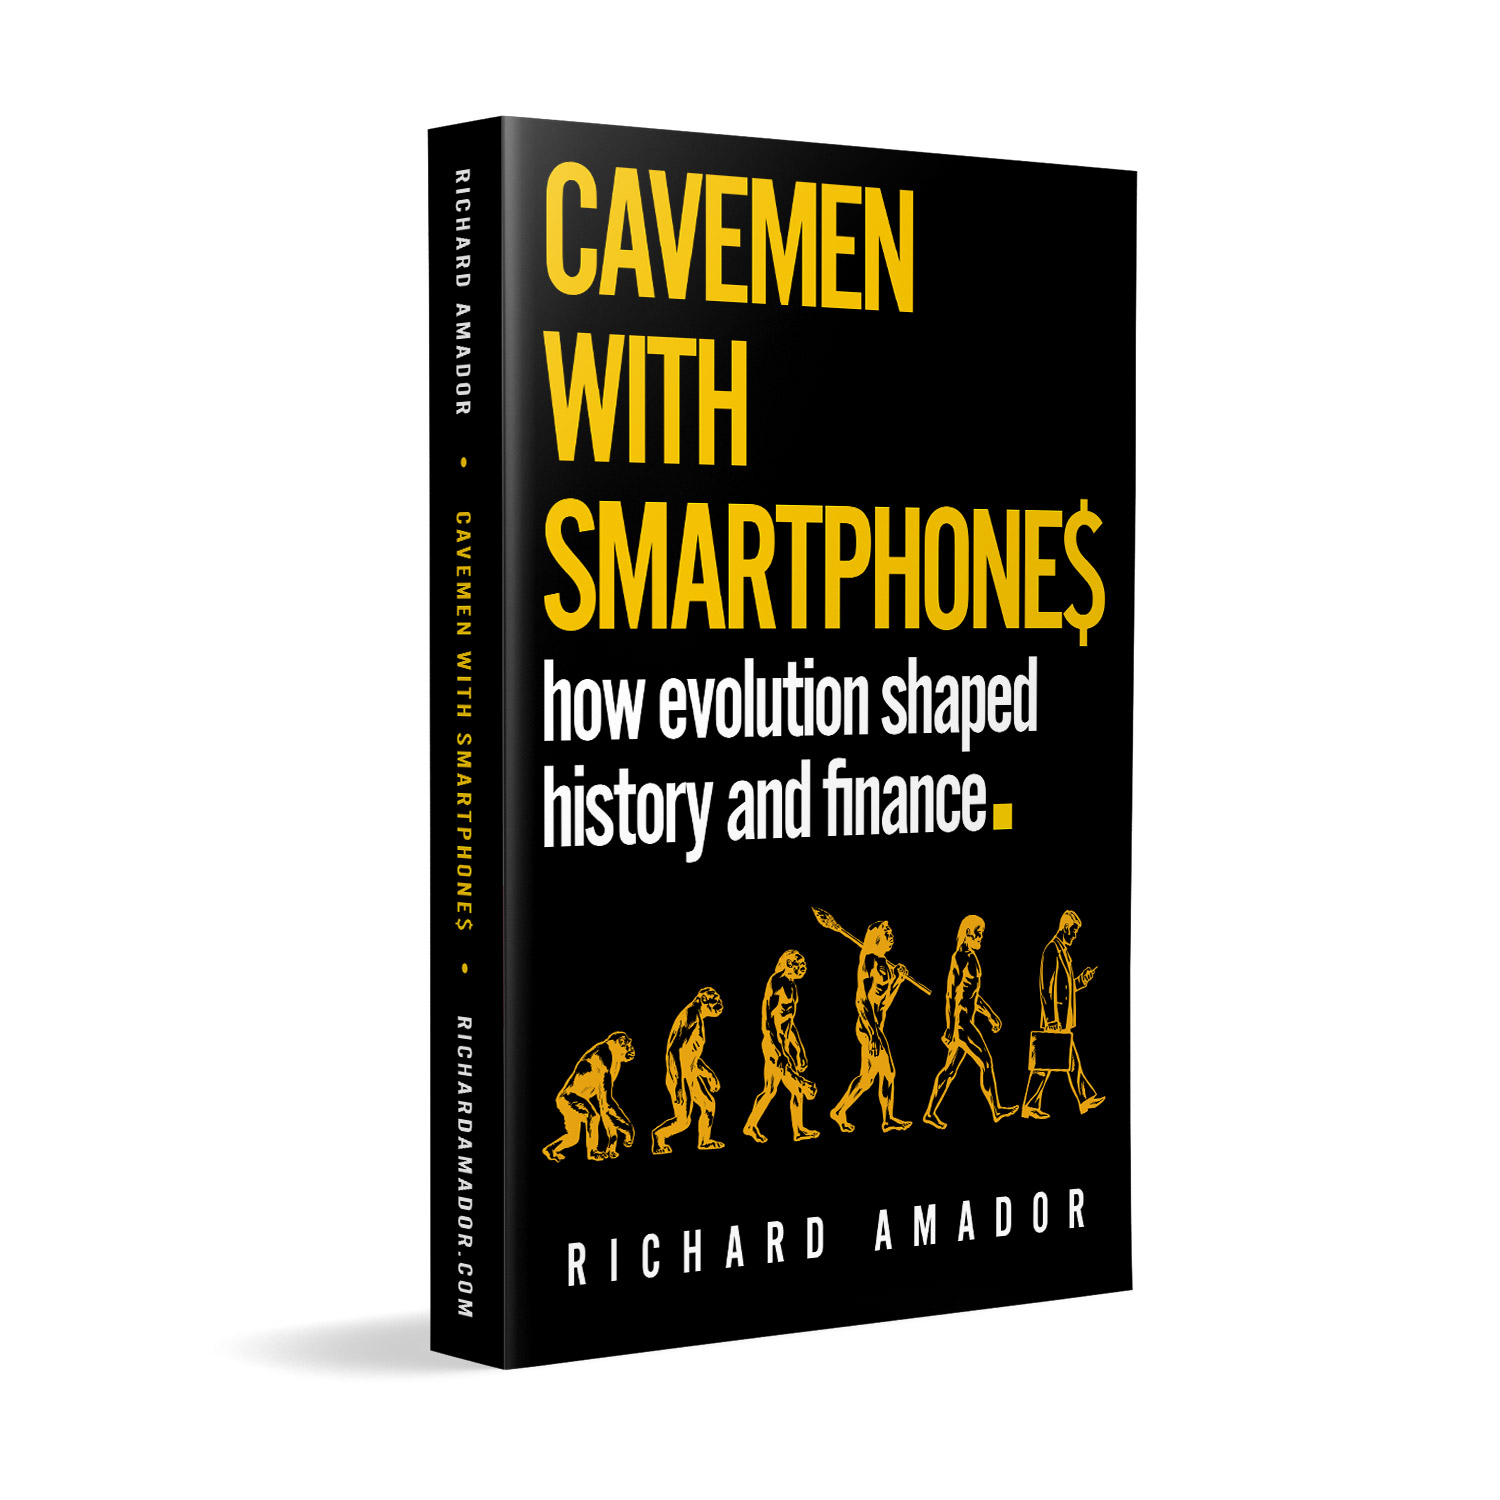 'Cavemen With Smartphones' is tongue-in-cheek meditation on the links between evolution, history and finance. The author is Richard Amador. The book cover & interior design is by Mark Thomas. To learn more about what Mark could do for your book, please visit coverness.com.